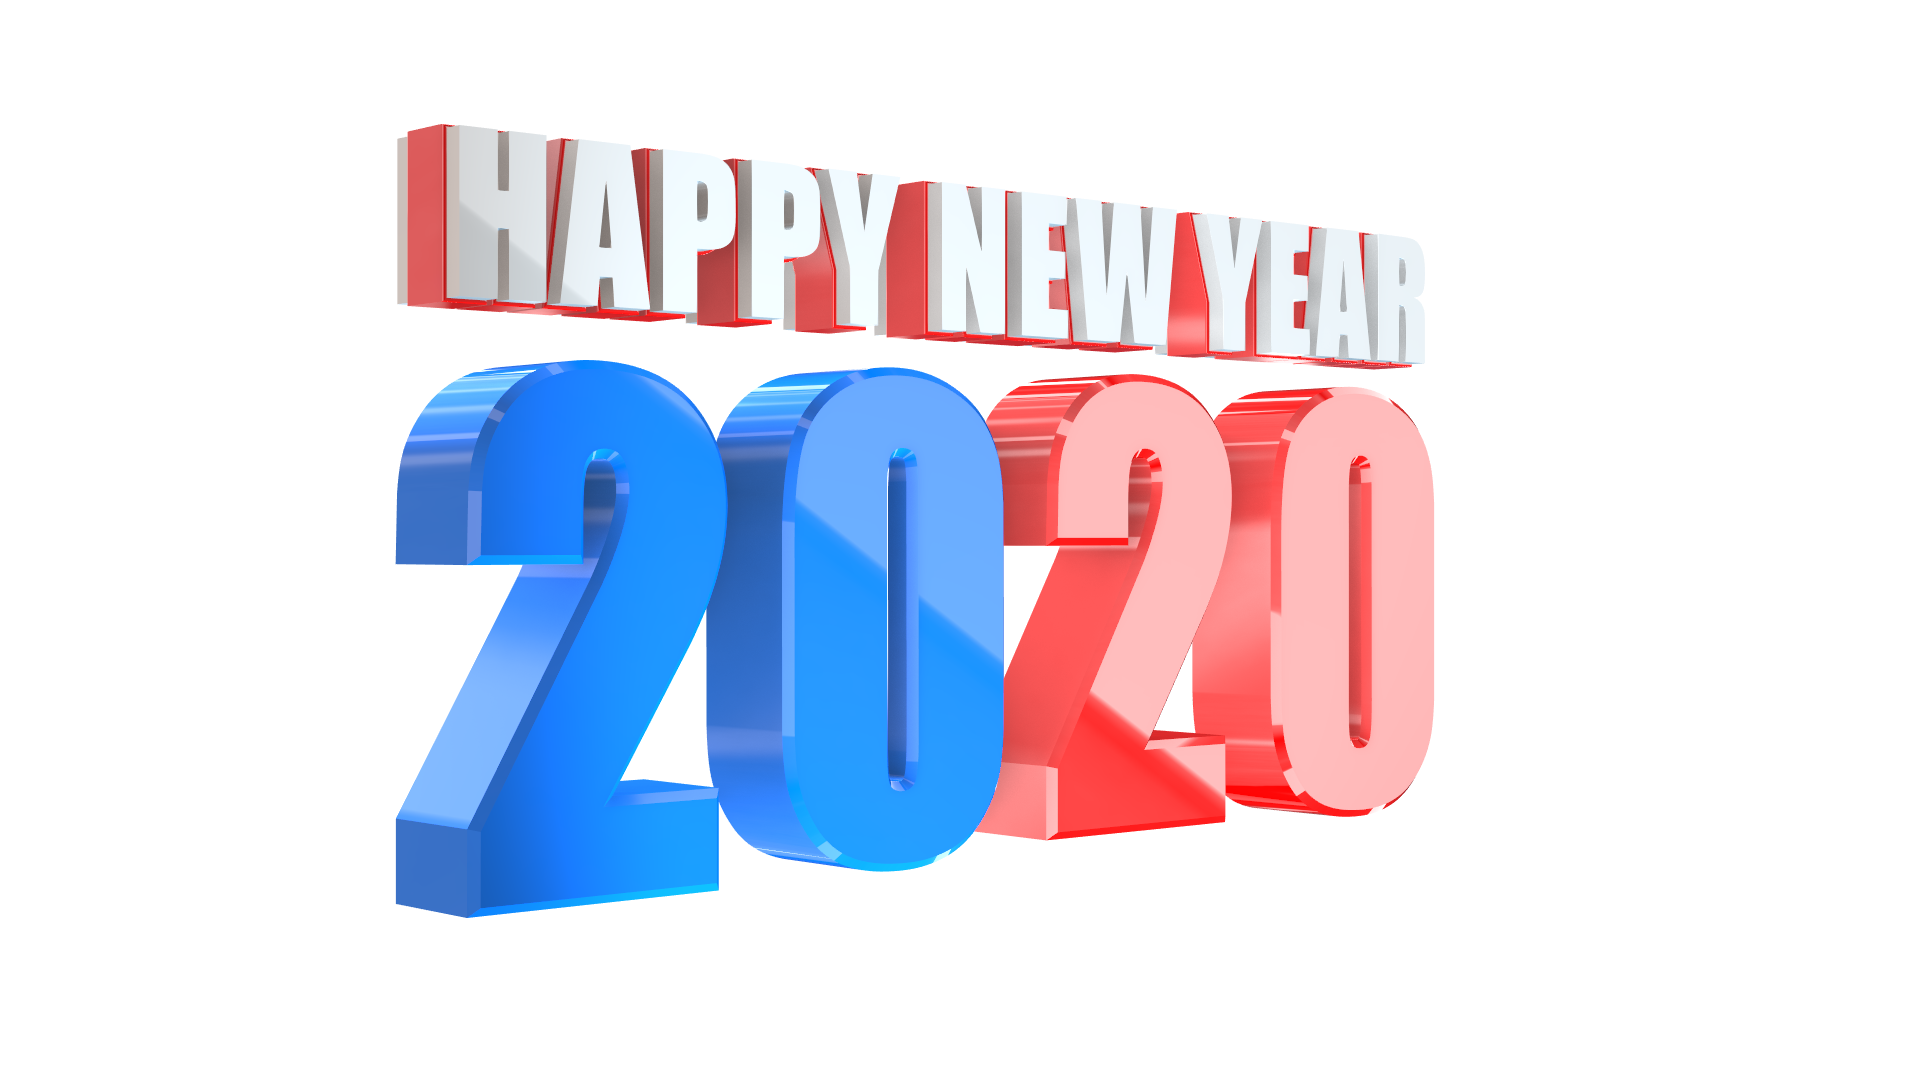 Happy new year 2020 text effect png stock photo colorful Illustration free download